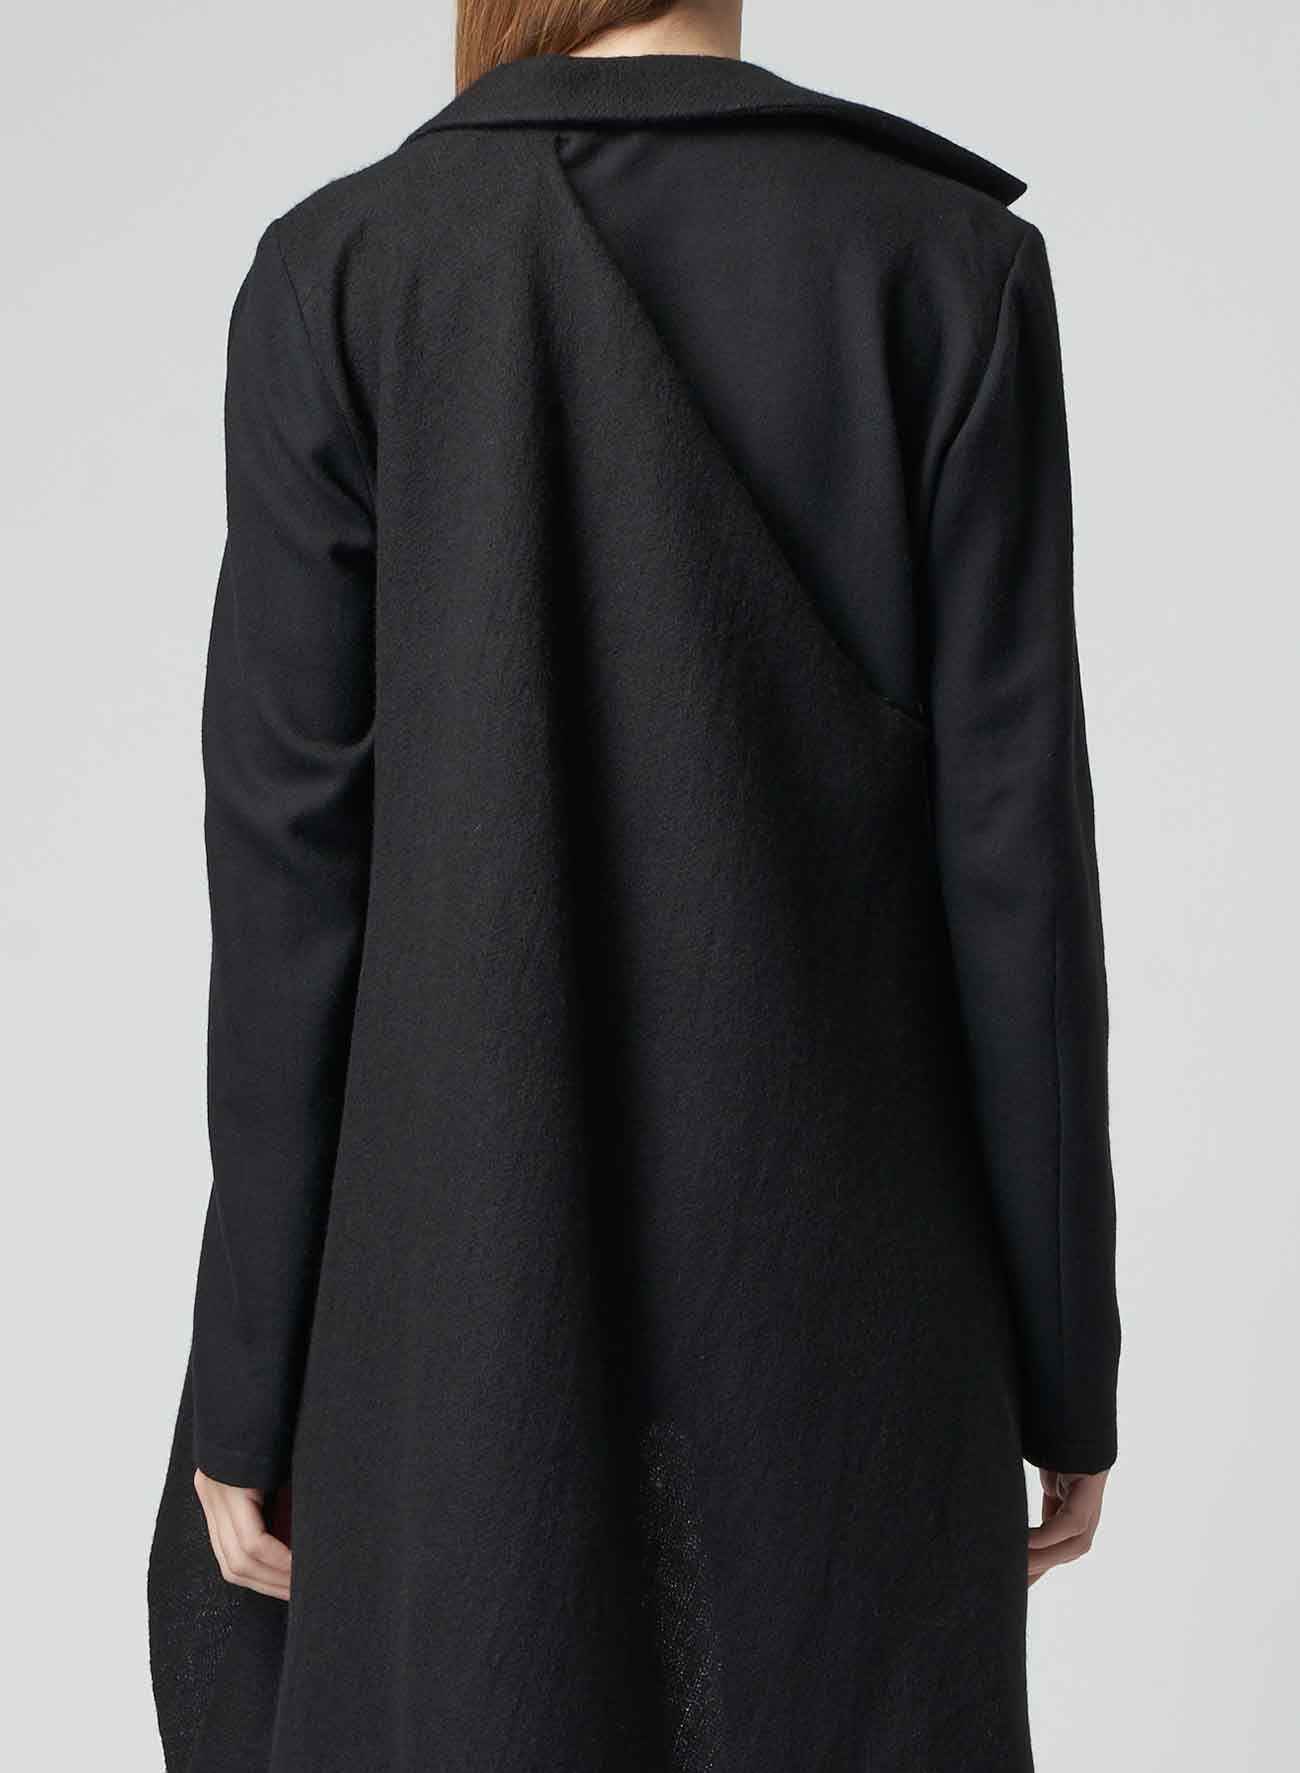 RIGHT-SIDE FLOWING JACKET